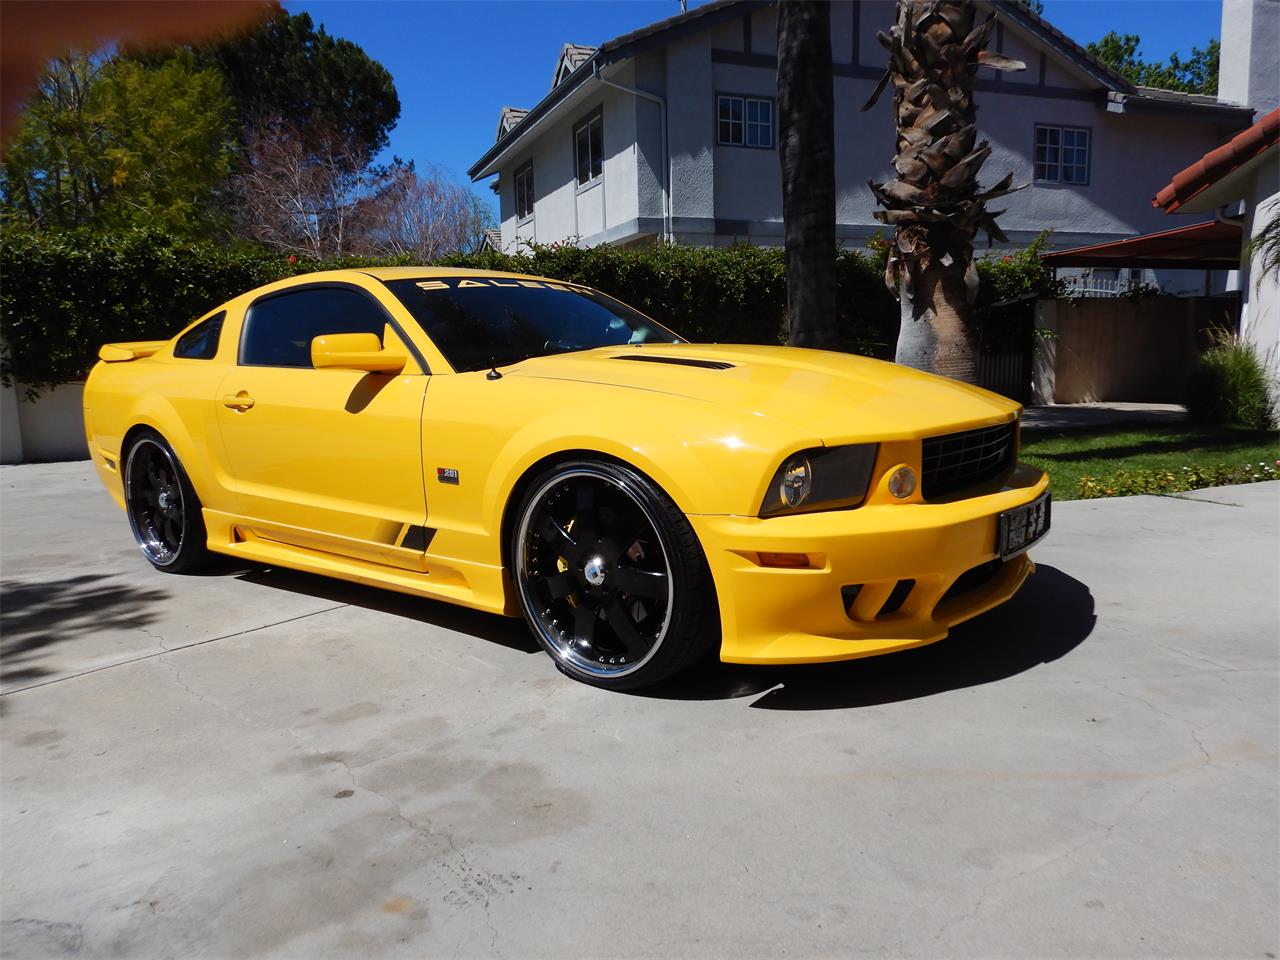 2006 Ford Mustang (Saleen) for sale in Woodland Hills, CA – photo 3